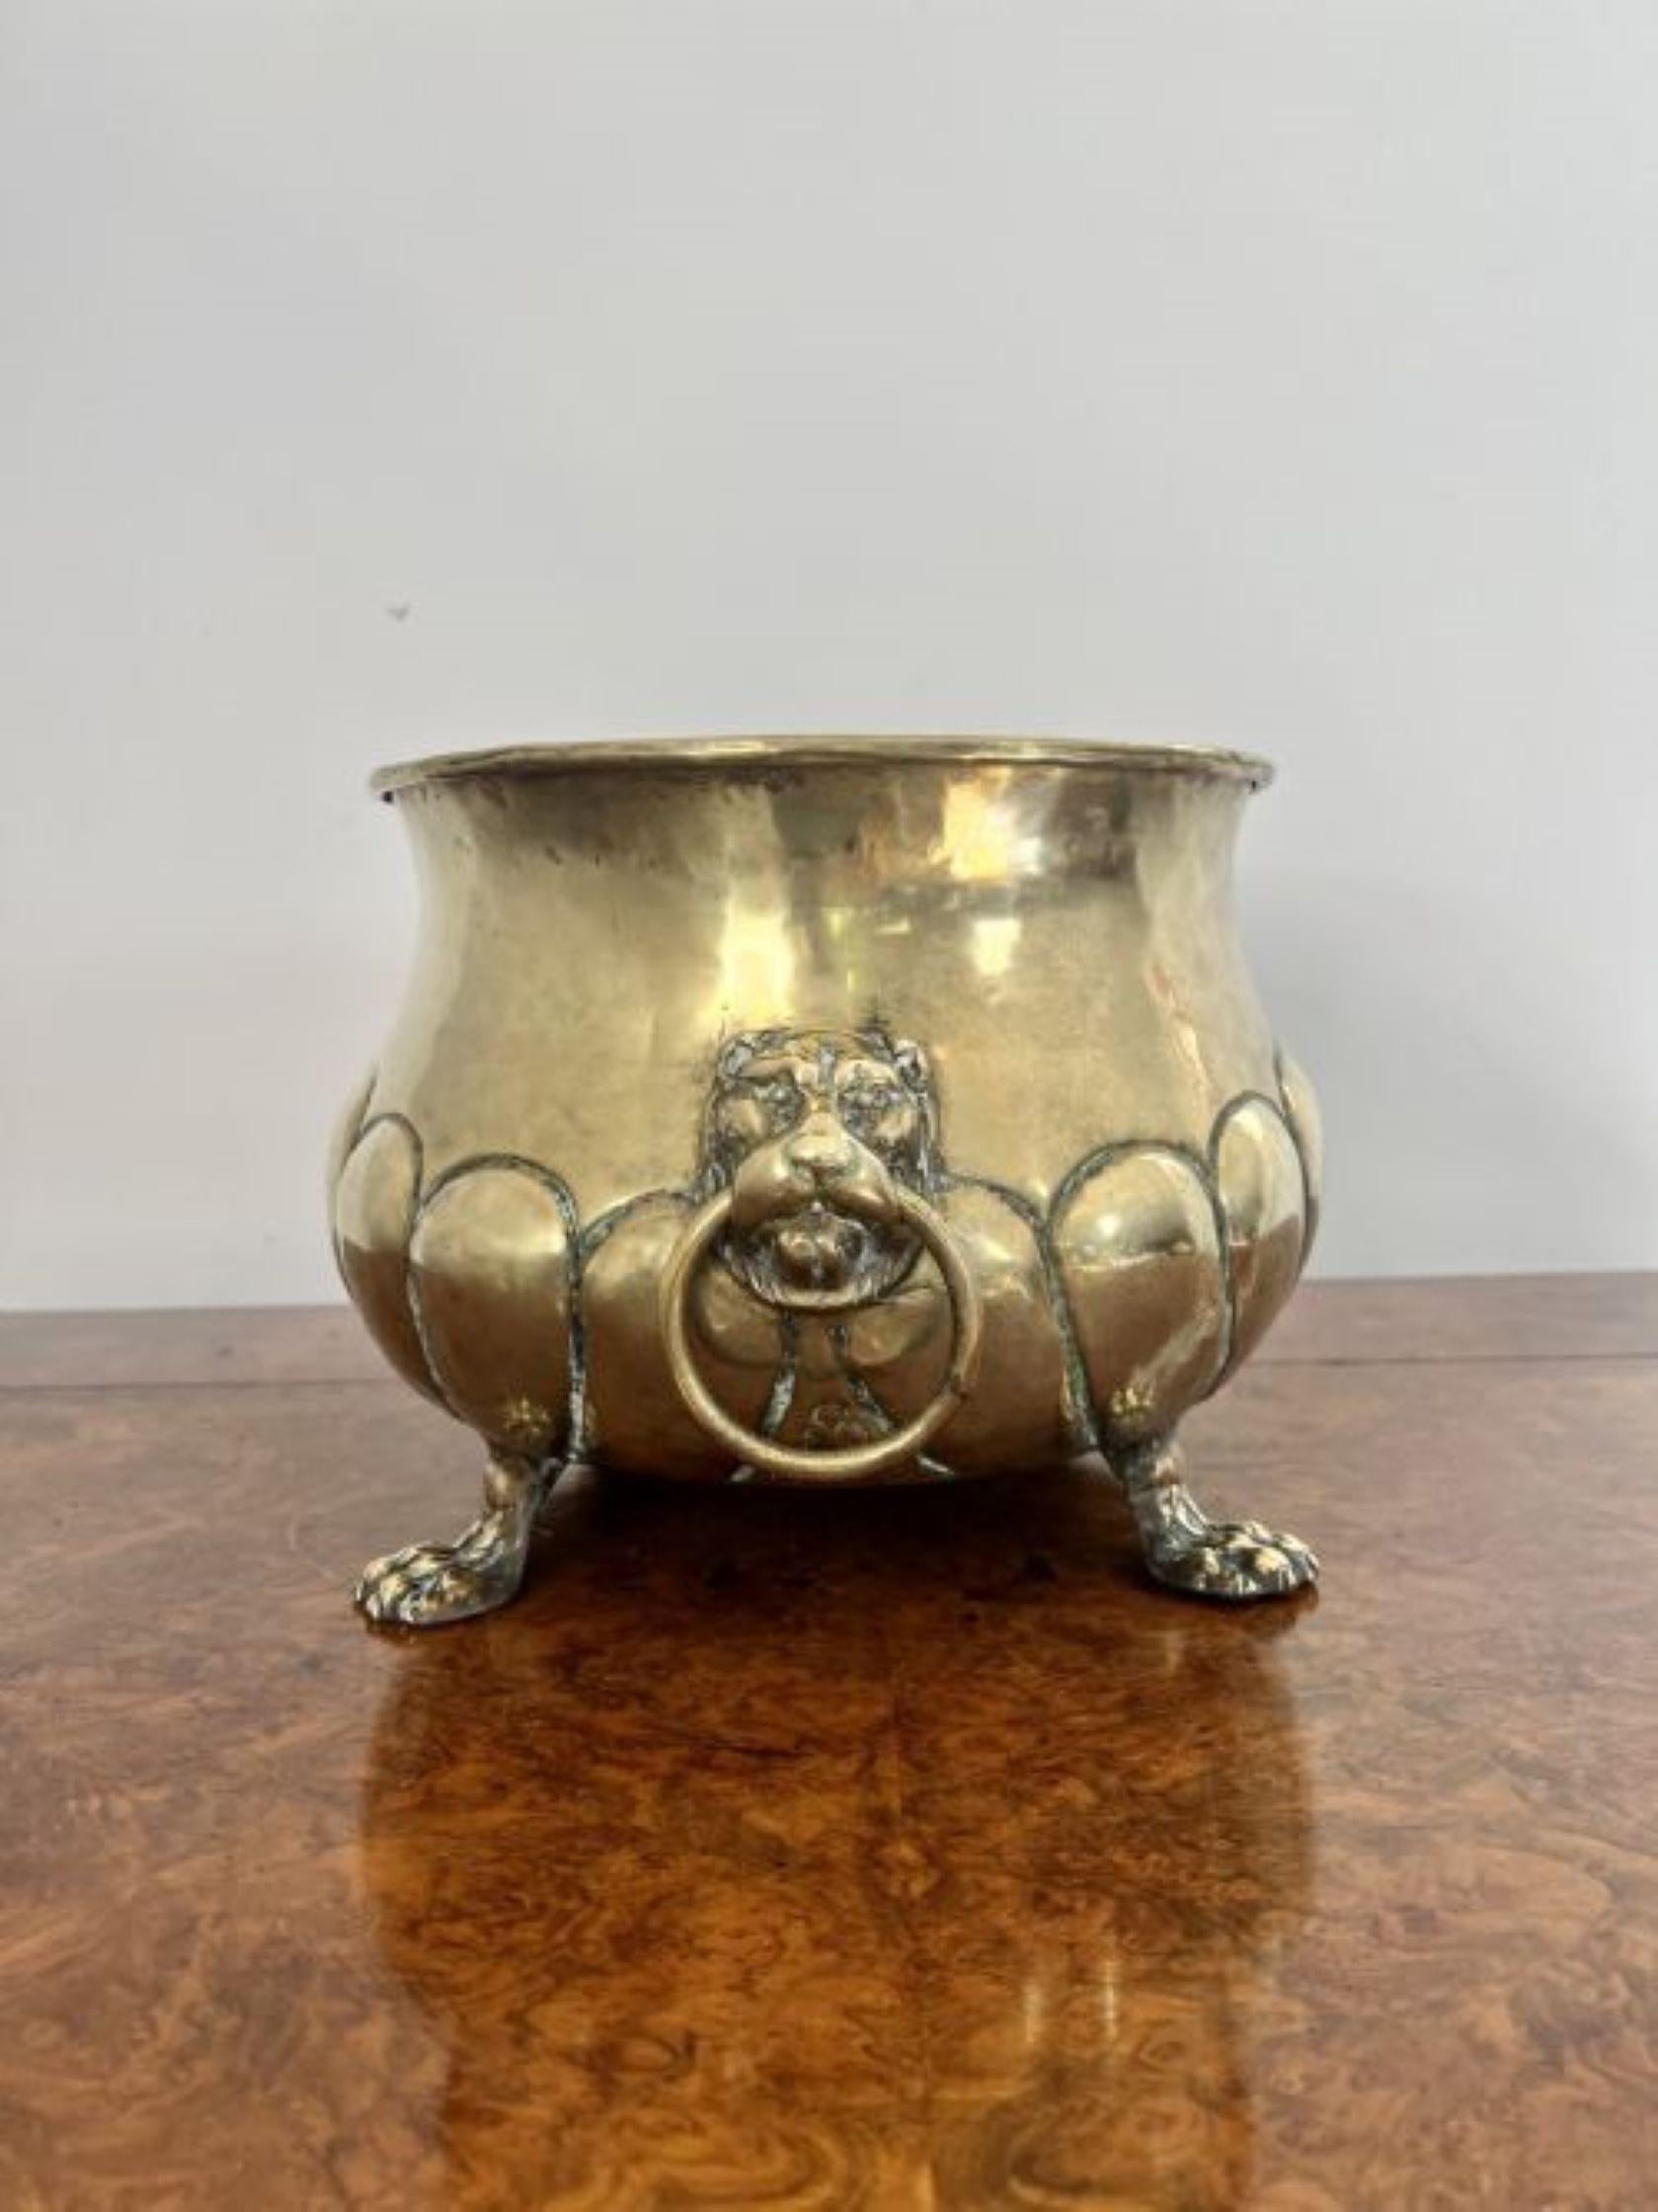 Quality Antique Victorian Brass Jardiniere having a quality antique Victorian brass jardinière with fantastic detail, lion mask handles to the sides standing on claw feet. 